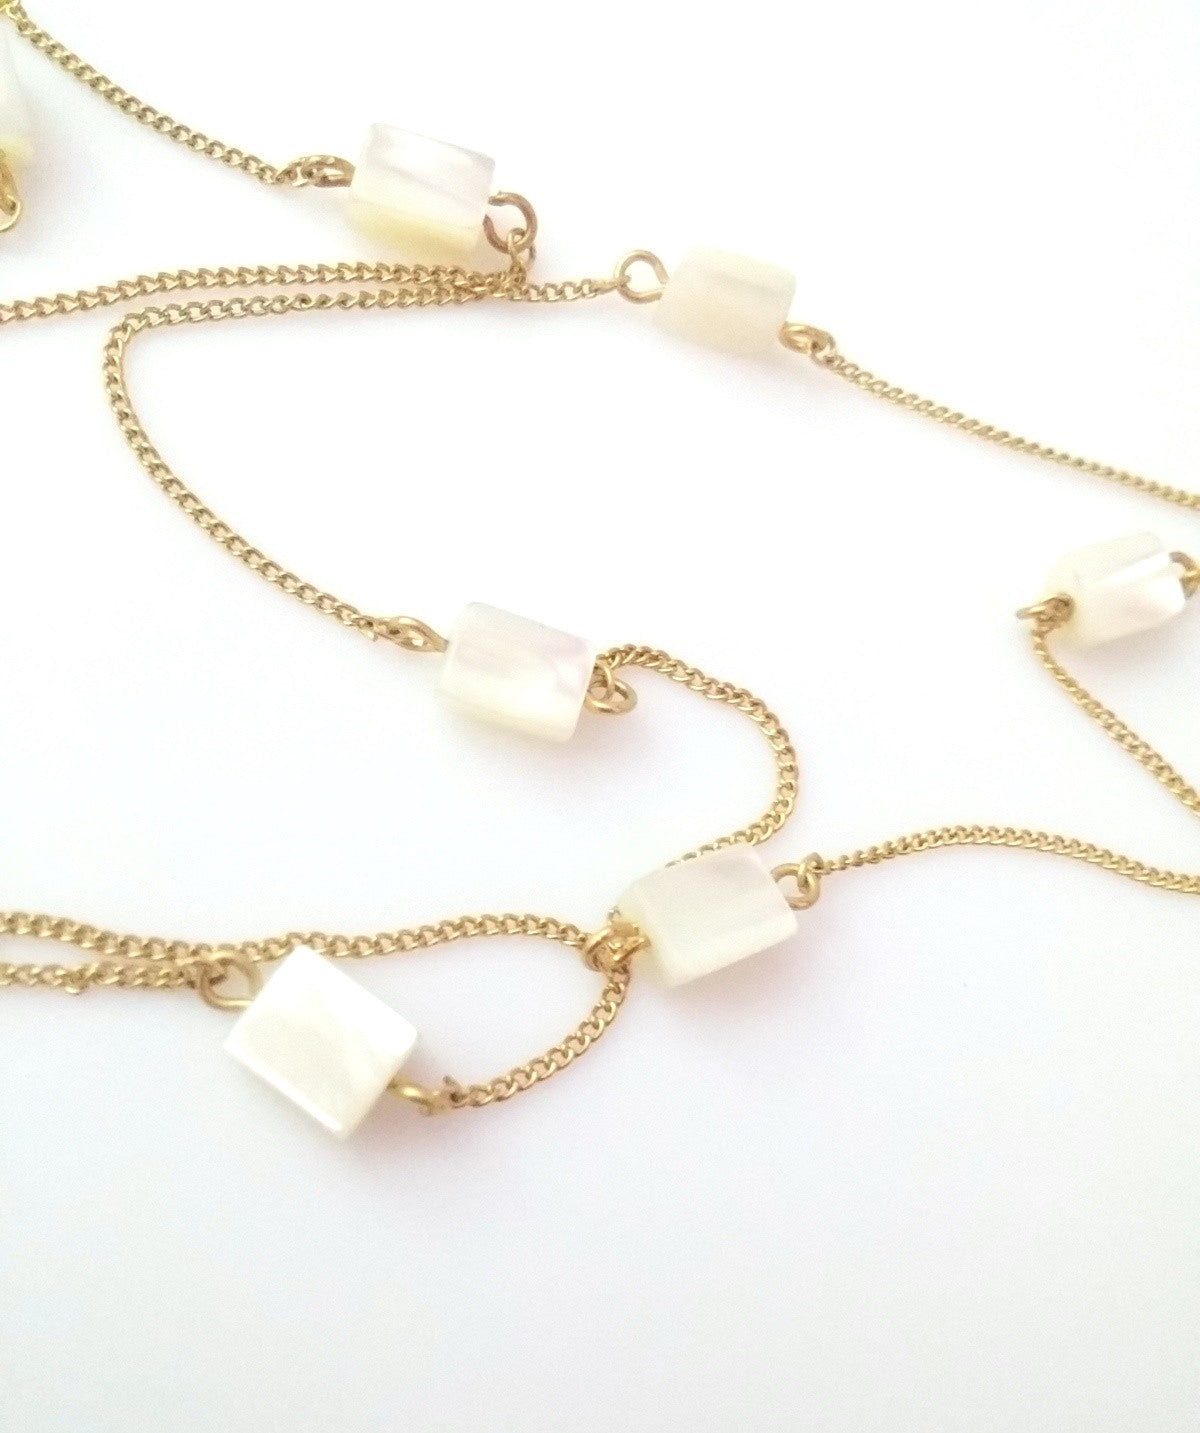 Vintage Necklace Gold Tone Chain w/ Mother of Pearl Stationed Rectangles - Dirty 30 Vintage | Vintage Clothing, Vintage Jewelry, Vintage Accessories